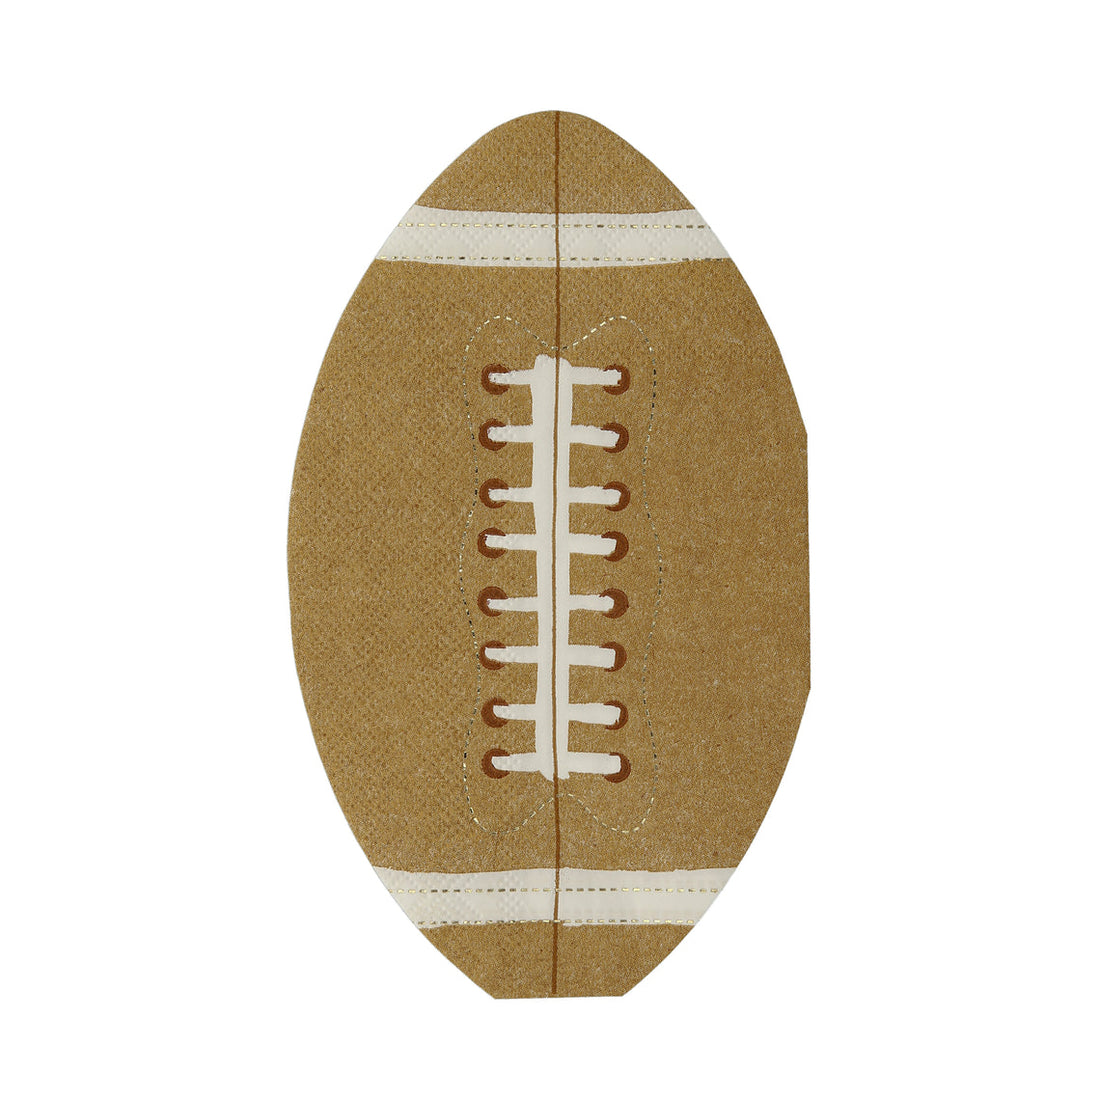 A tan and white Football Napkins on a white background, perfect for birthday parties featuring your favorite team. (Brand: Meri Meri)